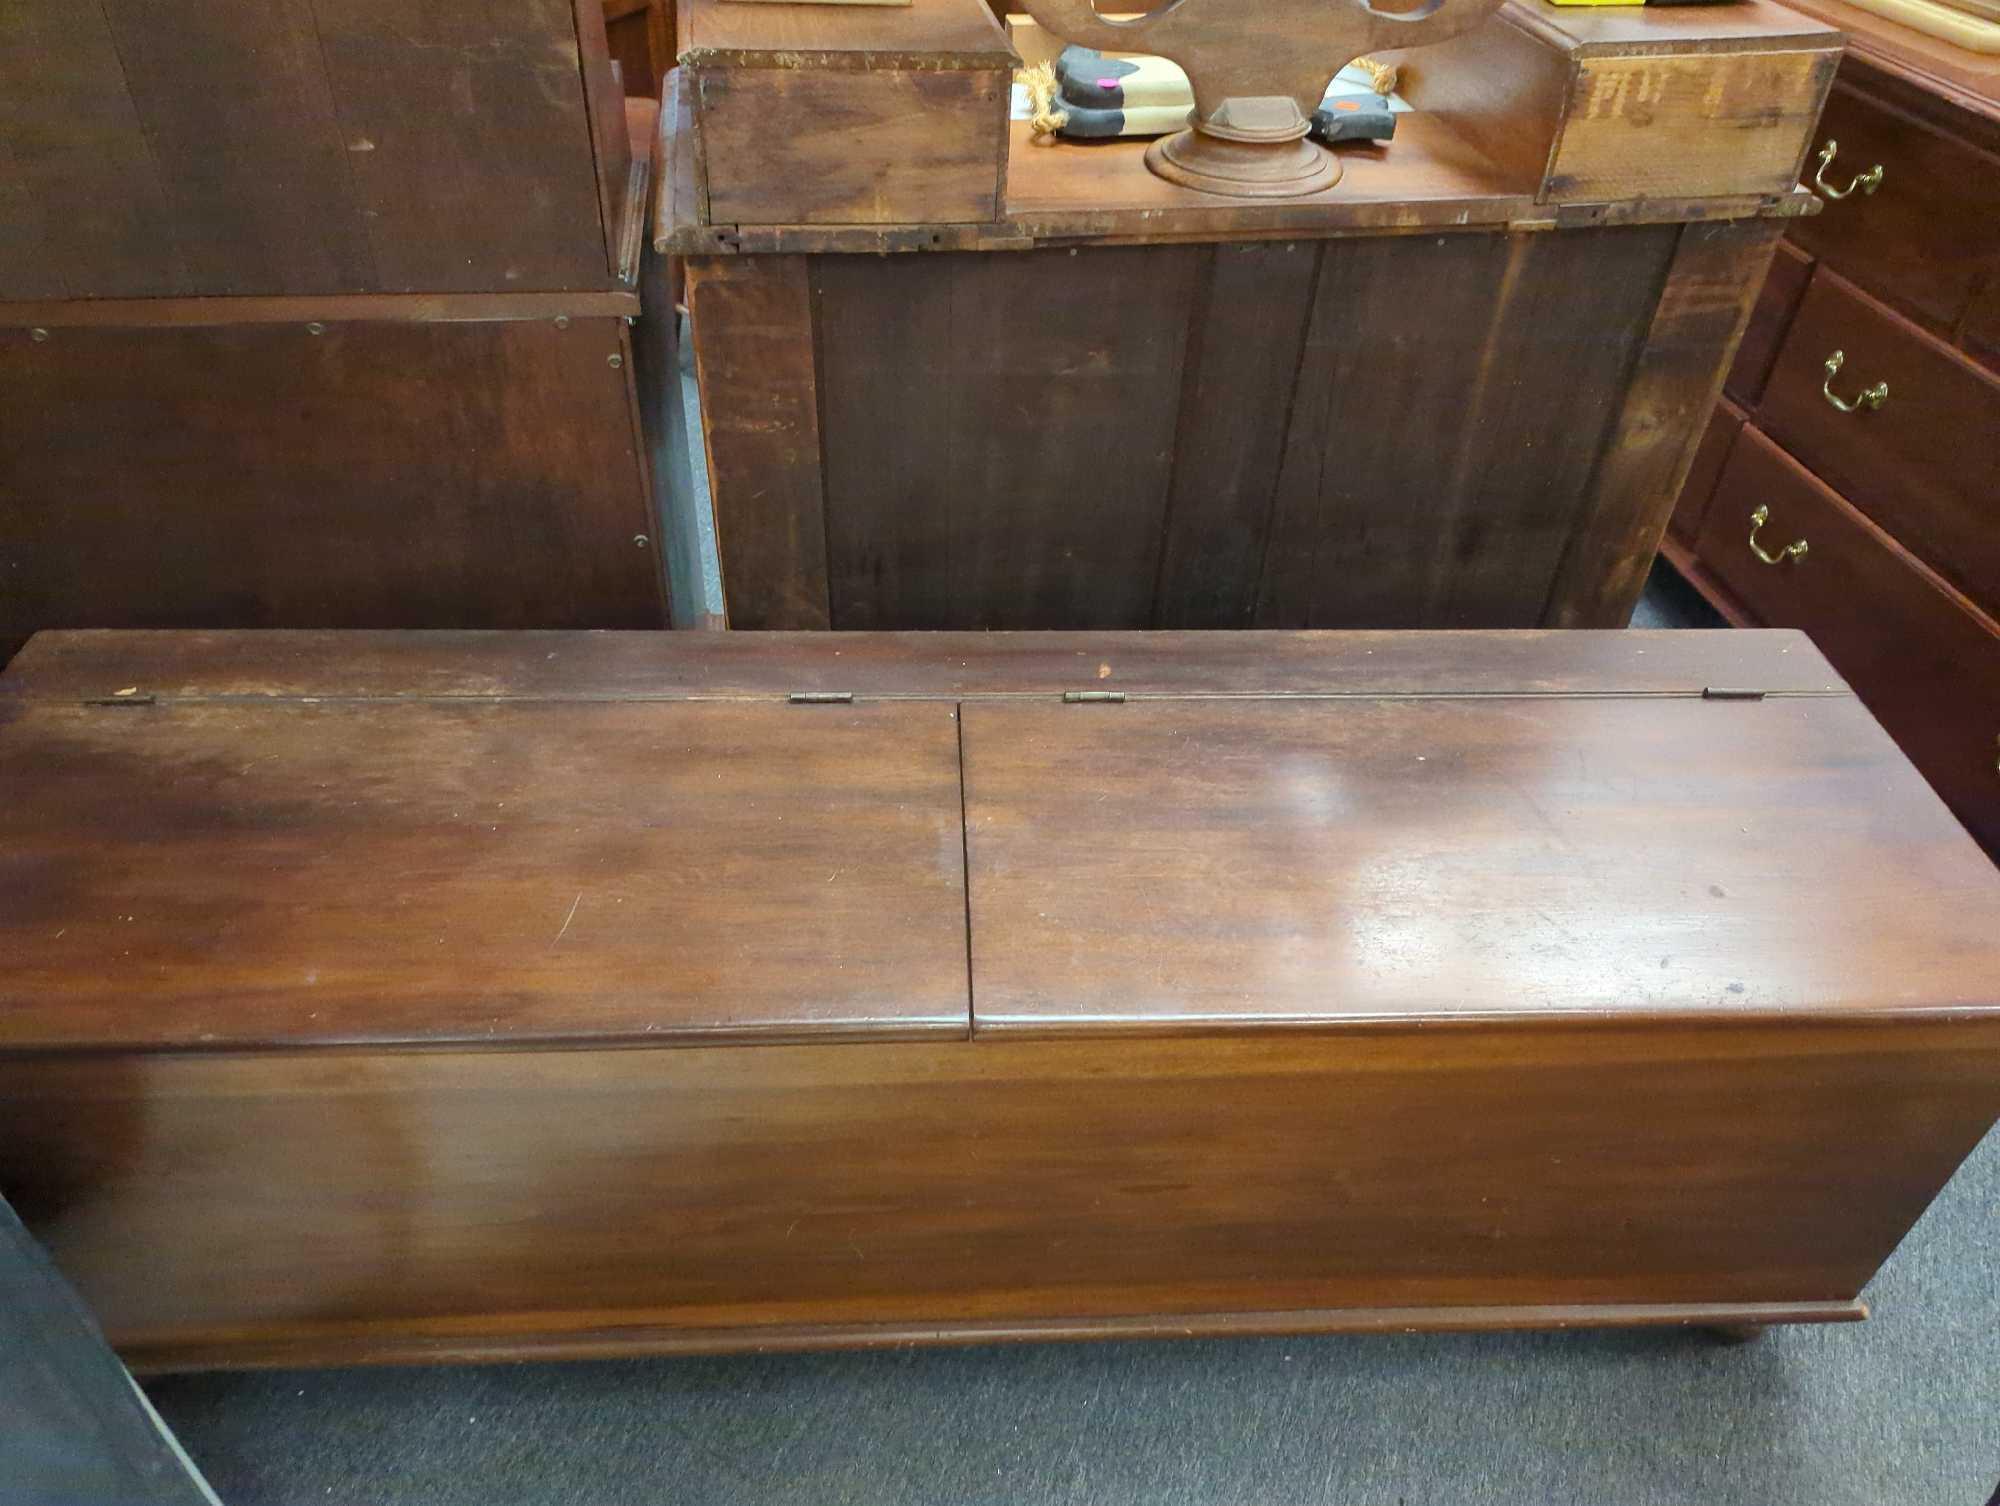 Early Style Mahogany Wood 2 Lid Trunk with A Breaker in The Center, Is in Great Condition Measure